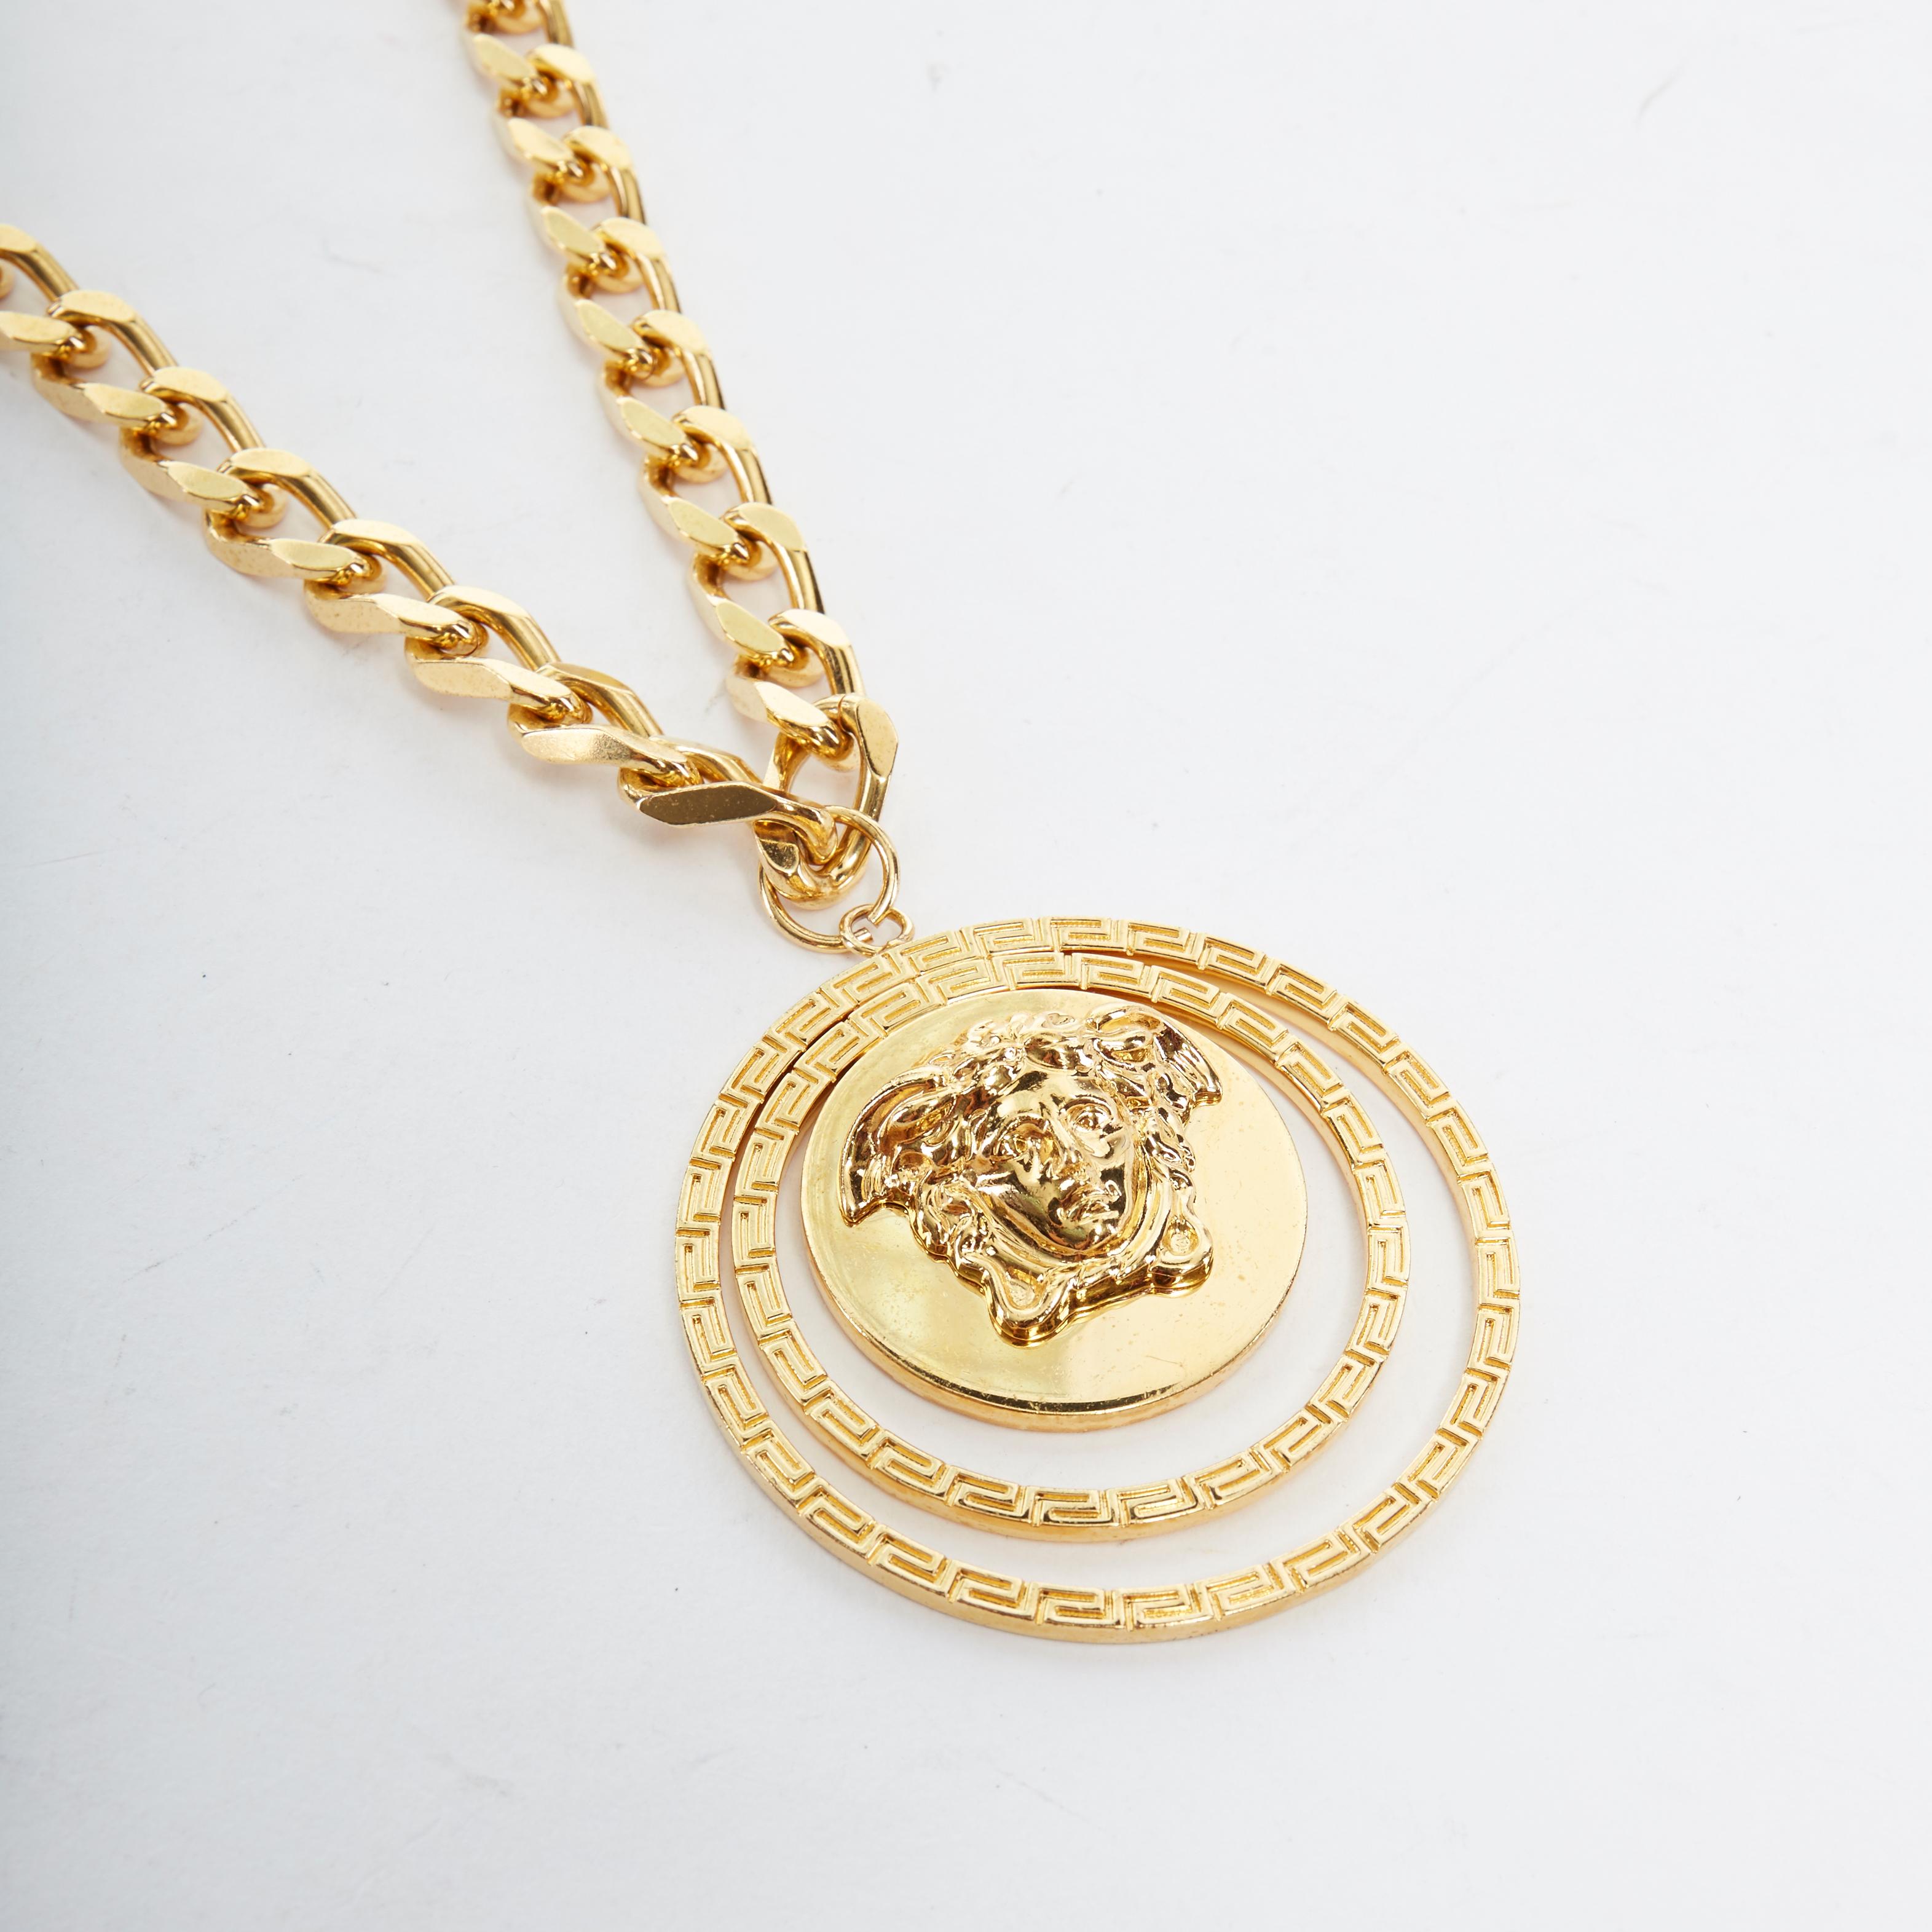 new VERSACE gold tone nickel Medusa halo medallion coin chunky long necklace
Reference: TGAS/A01721
Brand: Versace
Designer: Donatella Versace
Material: Nickel
Color: Gold
Pattern: Solid
Extra Details: Gold-tone nickel metal. Large Medallion coin